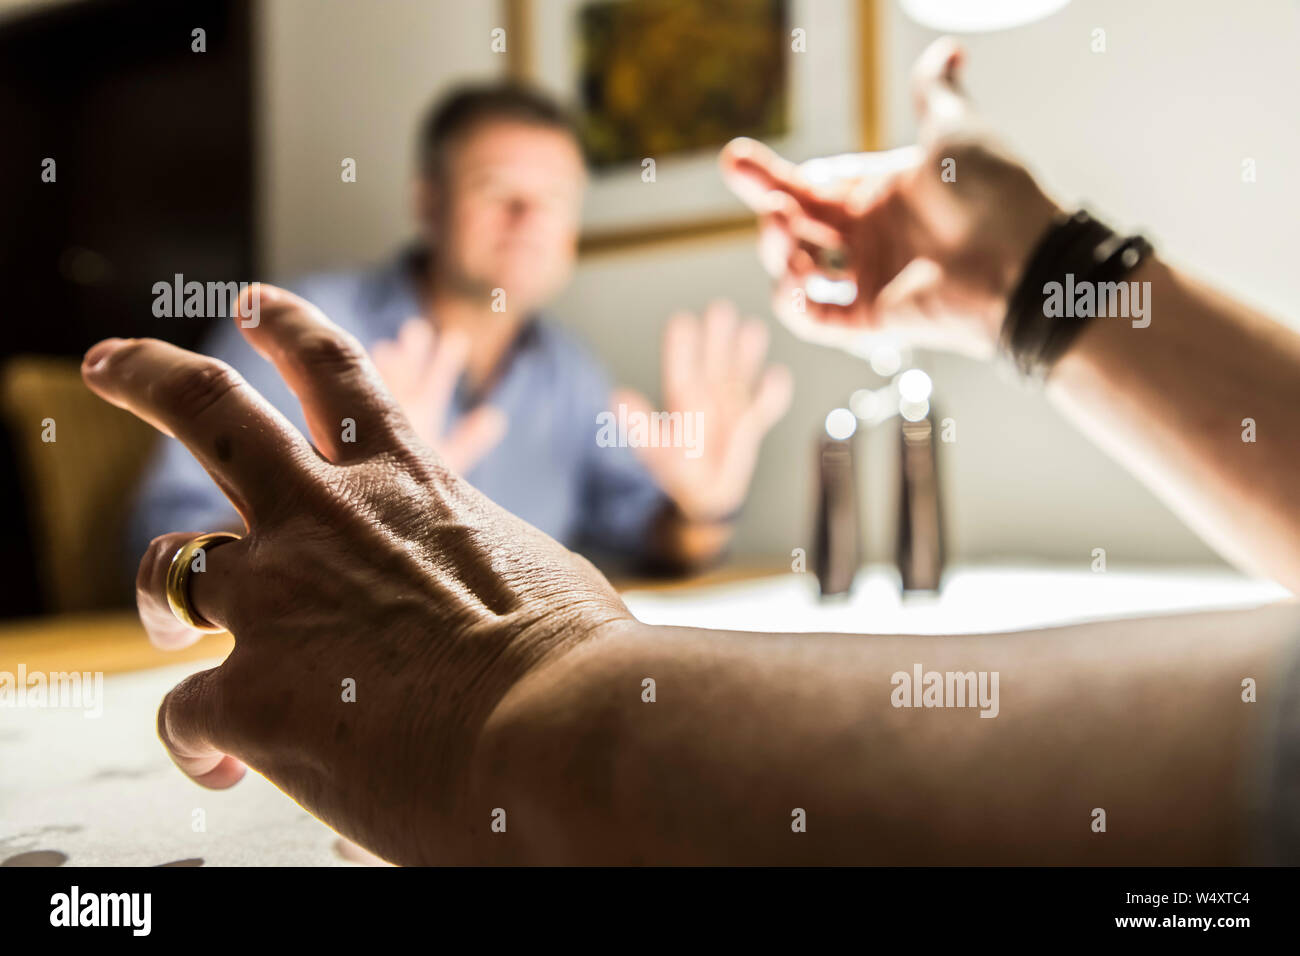 Symbol photo, argument, man and woman argue, discuss controversially, relationship stress, Stock Photo